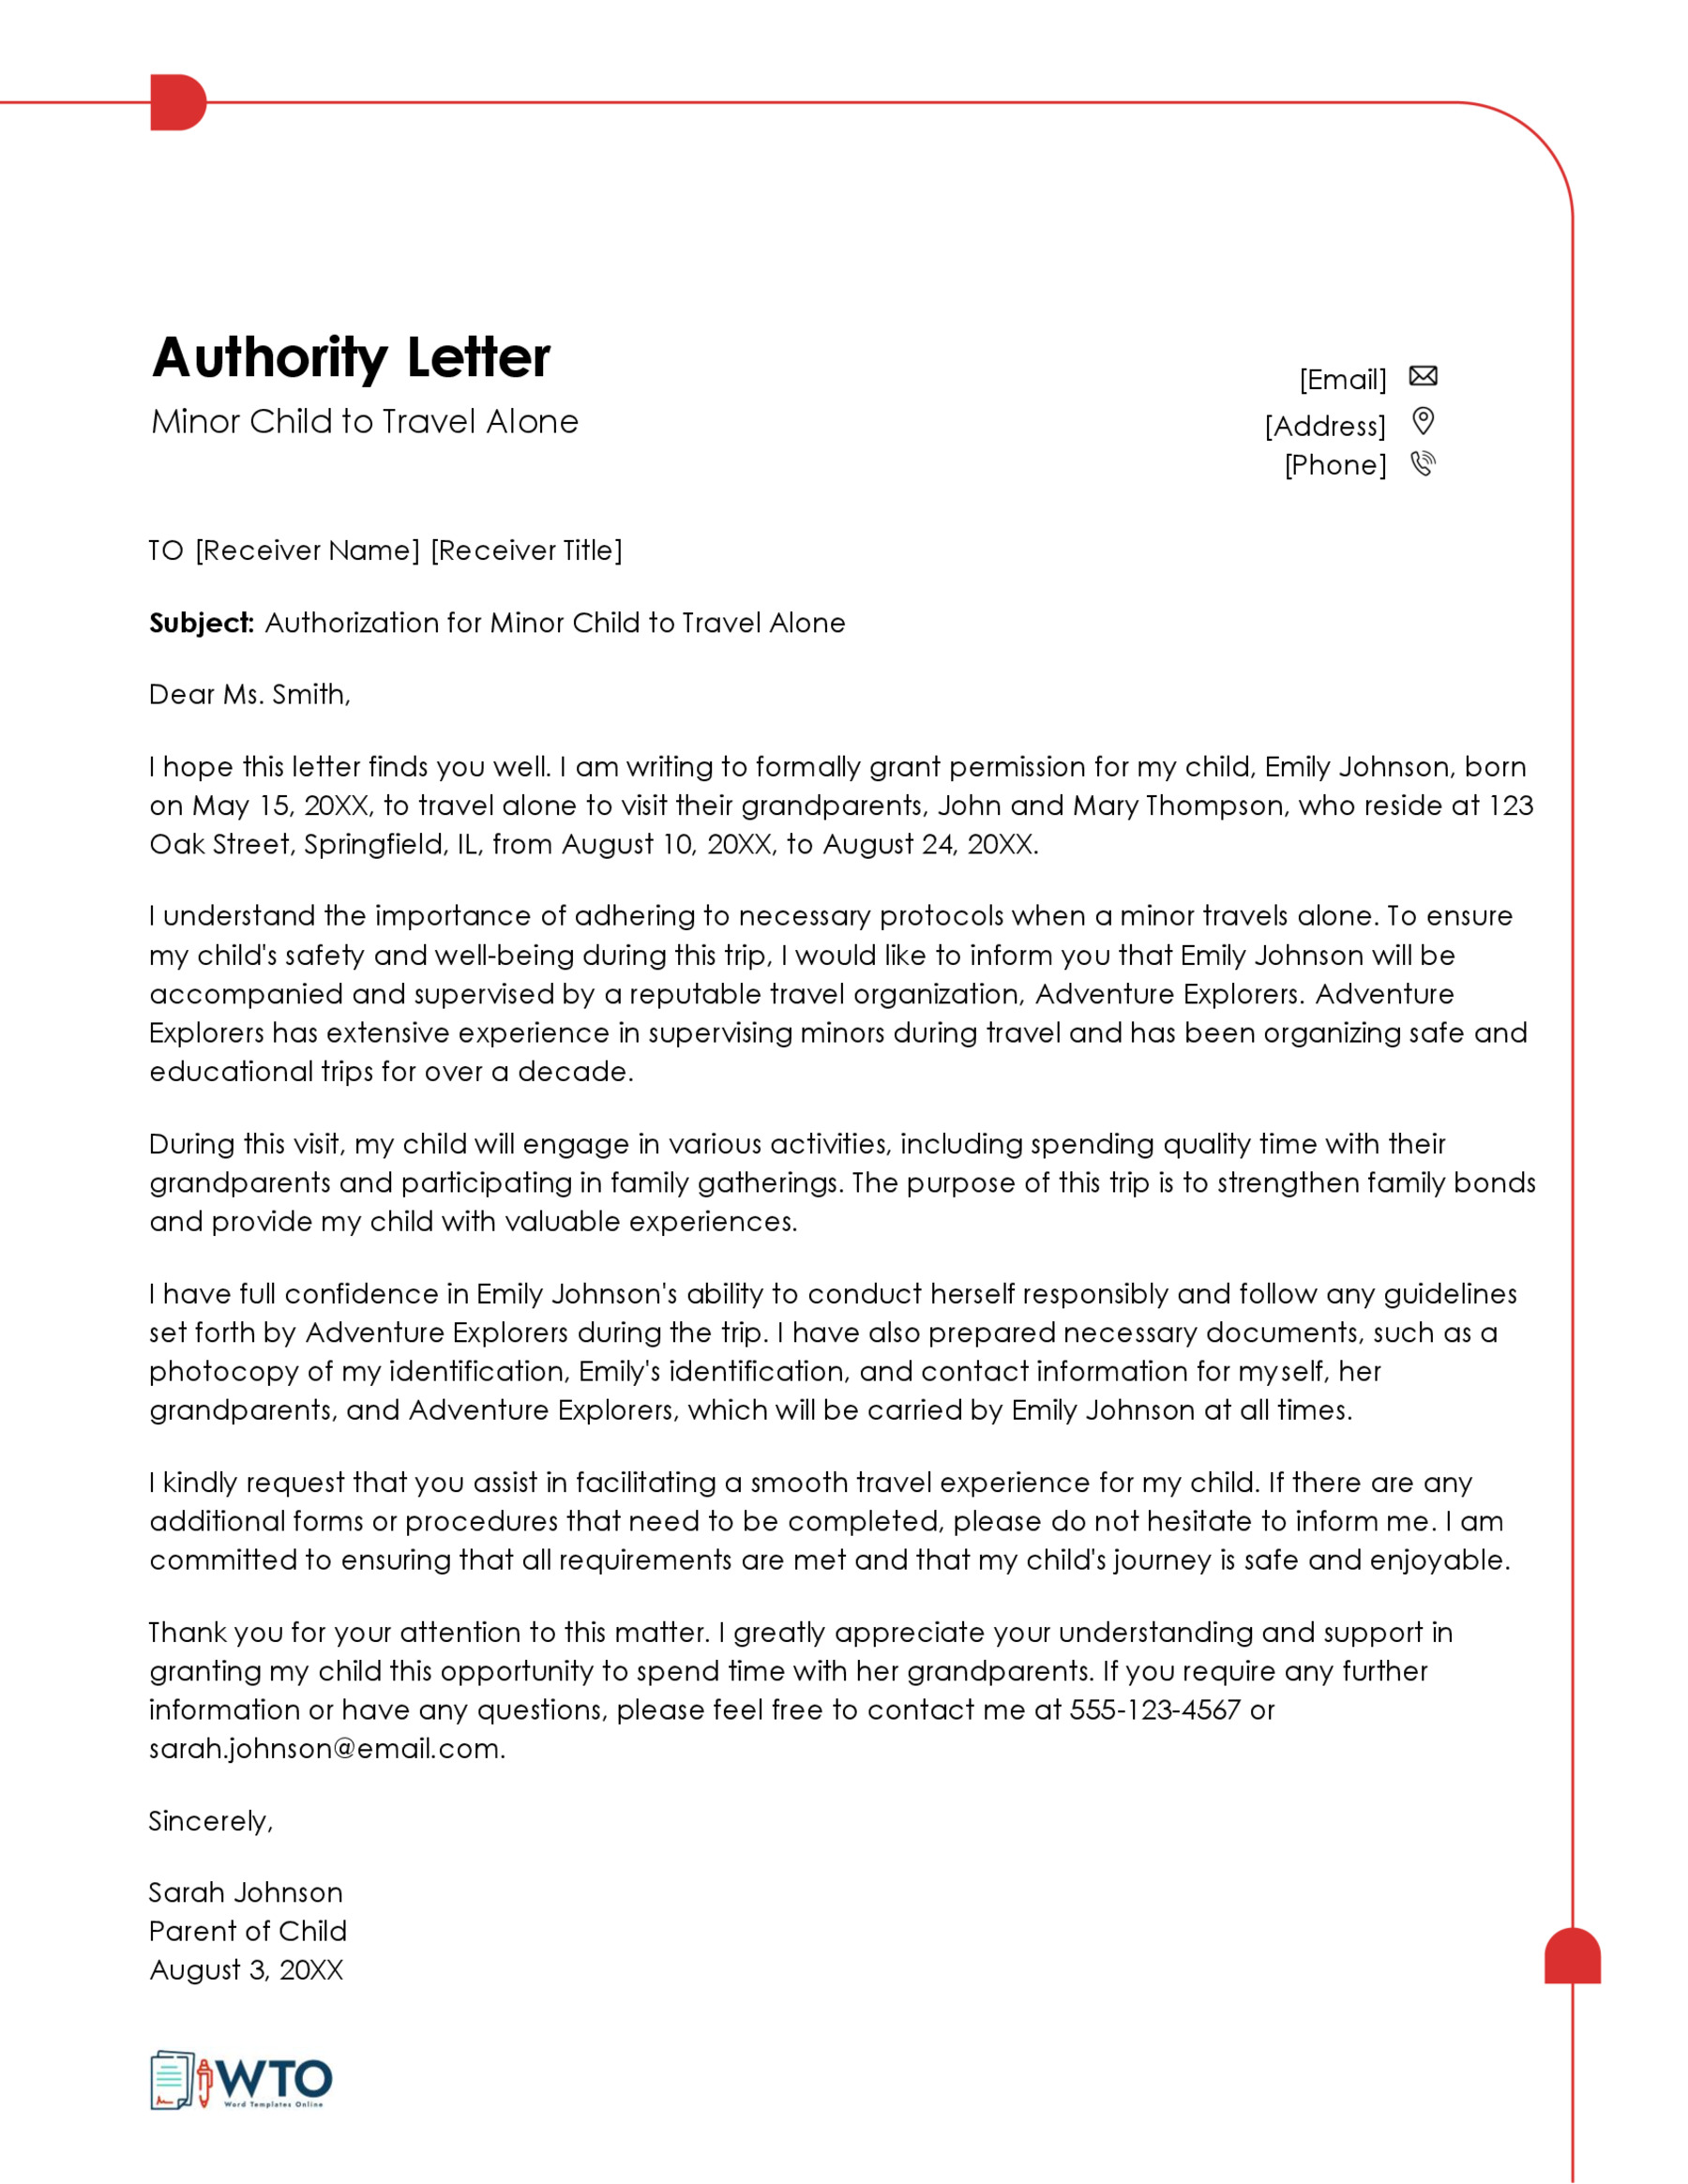 Sample Authorization Letter for a Child to Travel Alone-Free Download